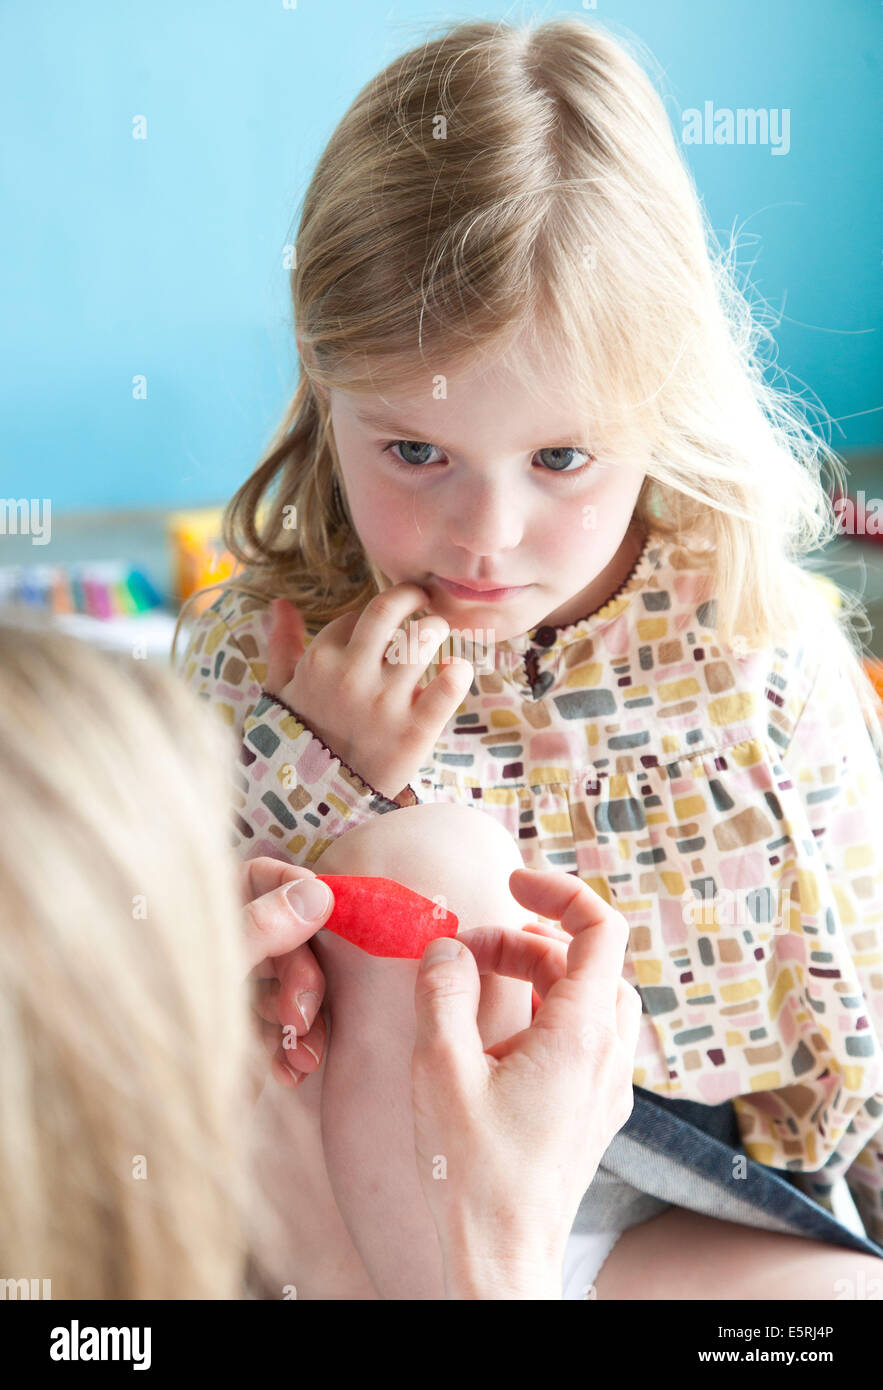 Mother applying band-aid on wounded knee of a girl. Stock Photo